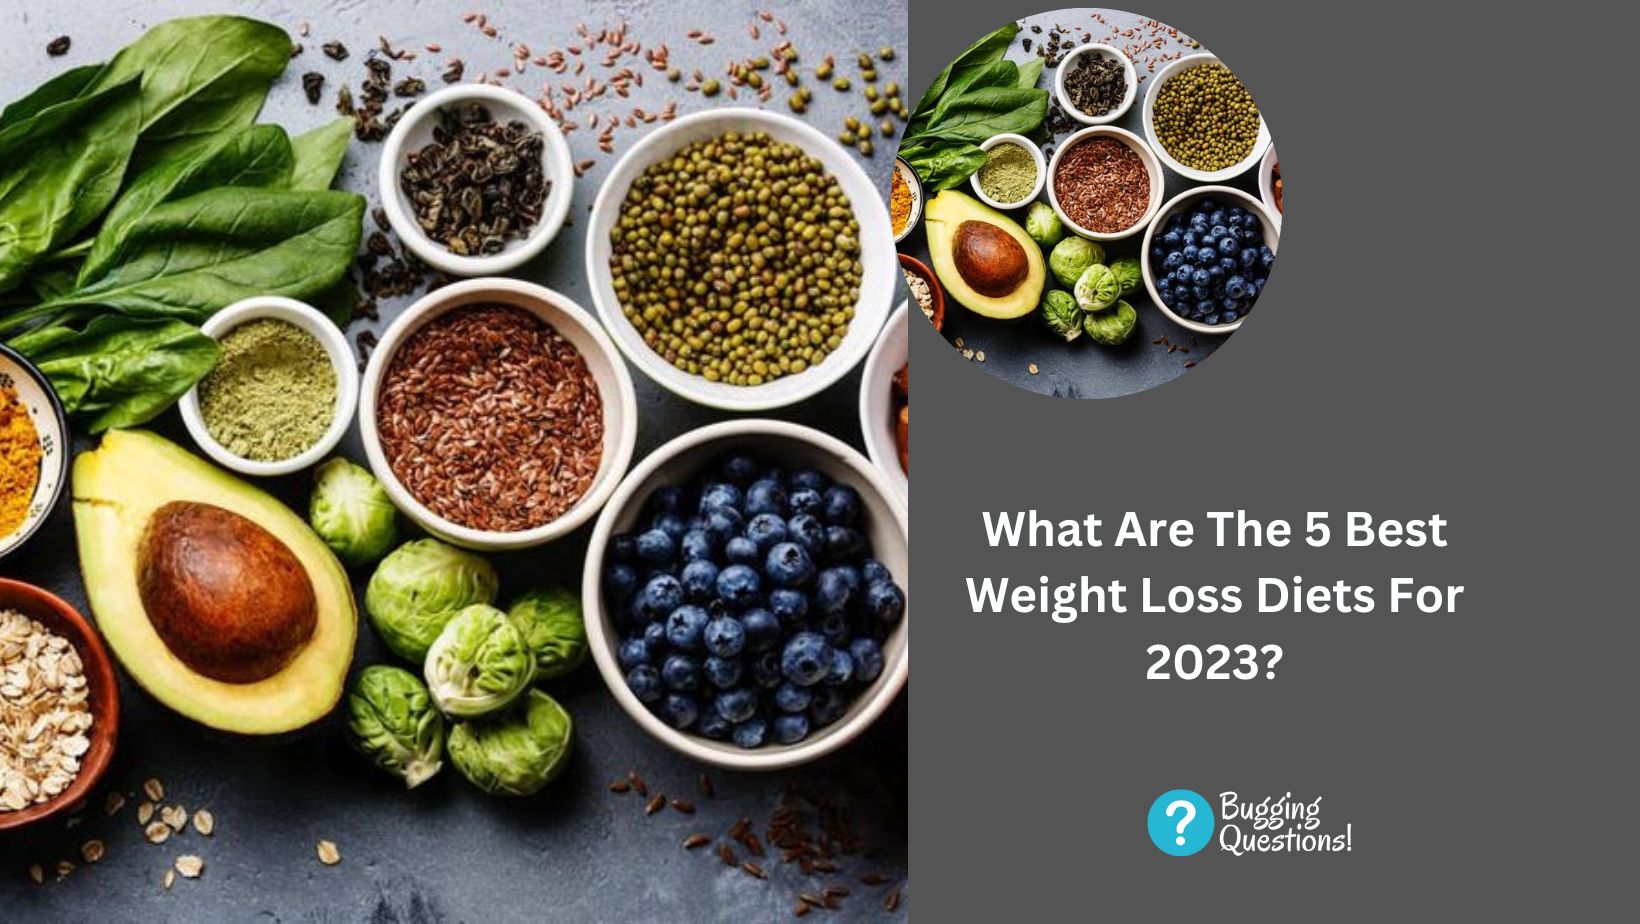 What Are The 5 Best Weight Loss Diets For 2023?